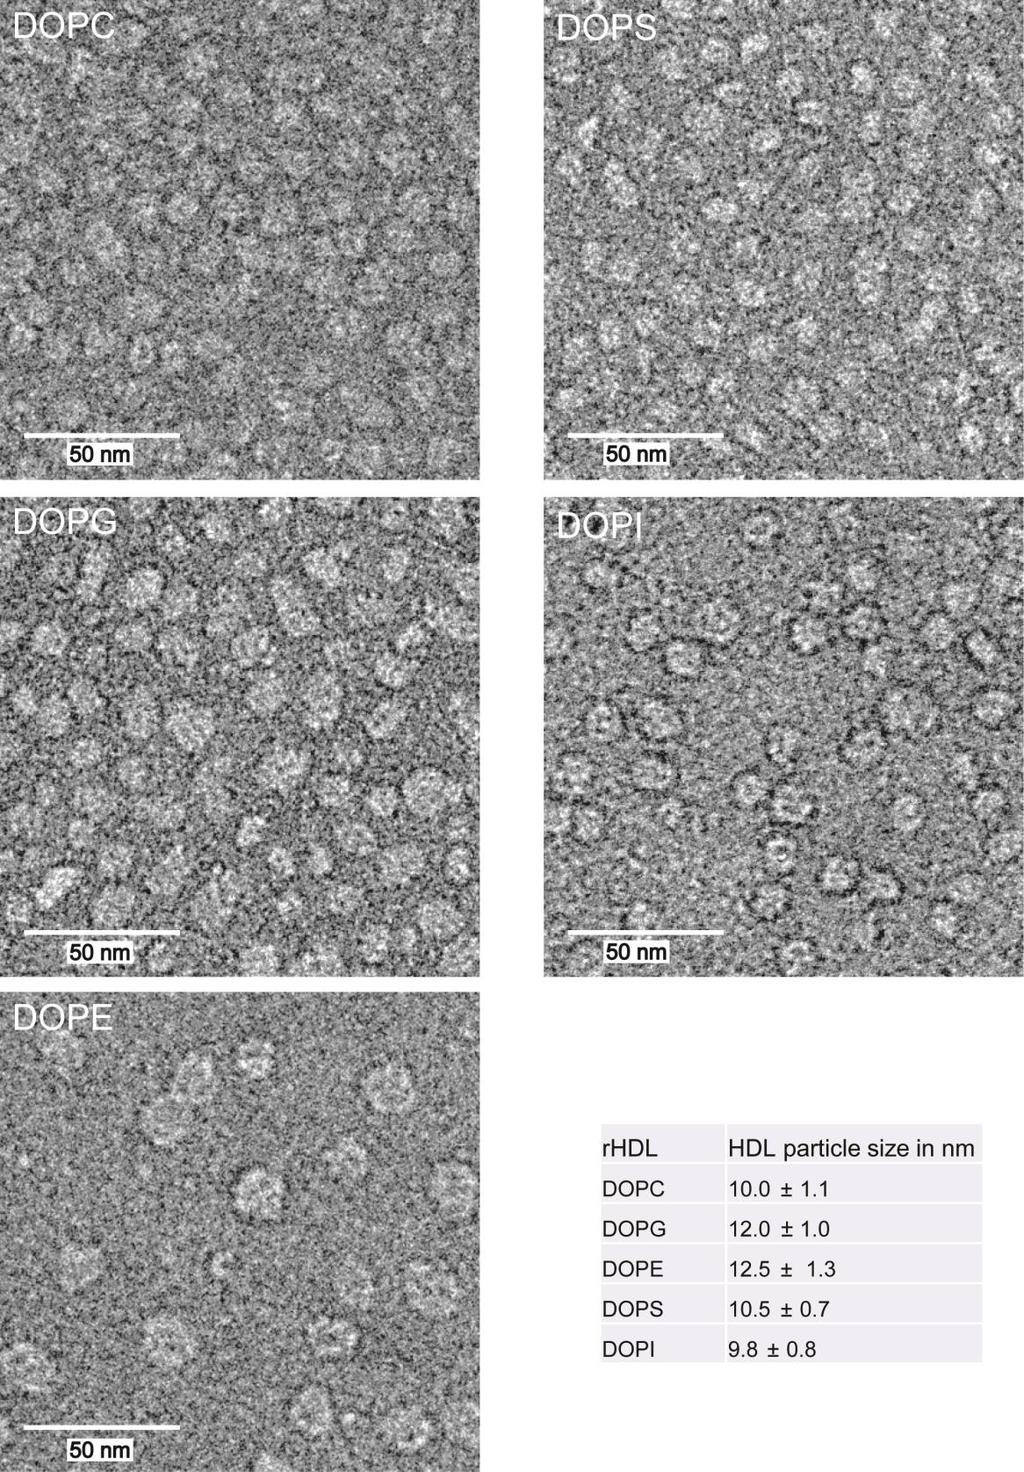 Supplementary Figure 3: Homogeneity and particle size analysis of 2R rhdls in different lipidic compositions.